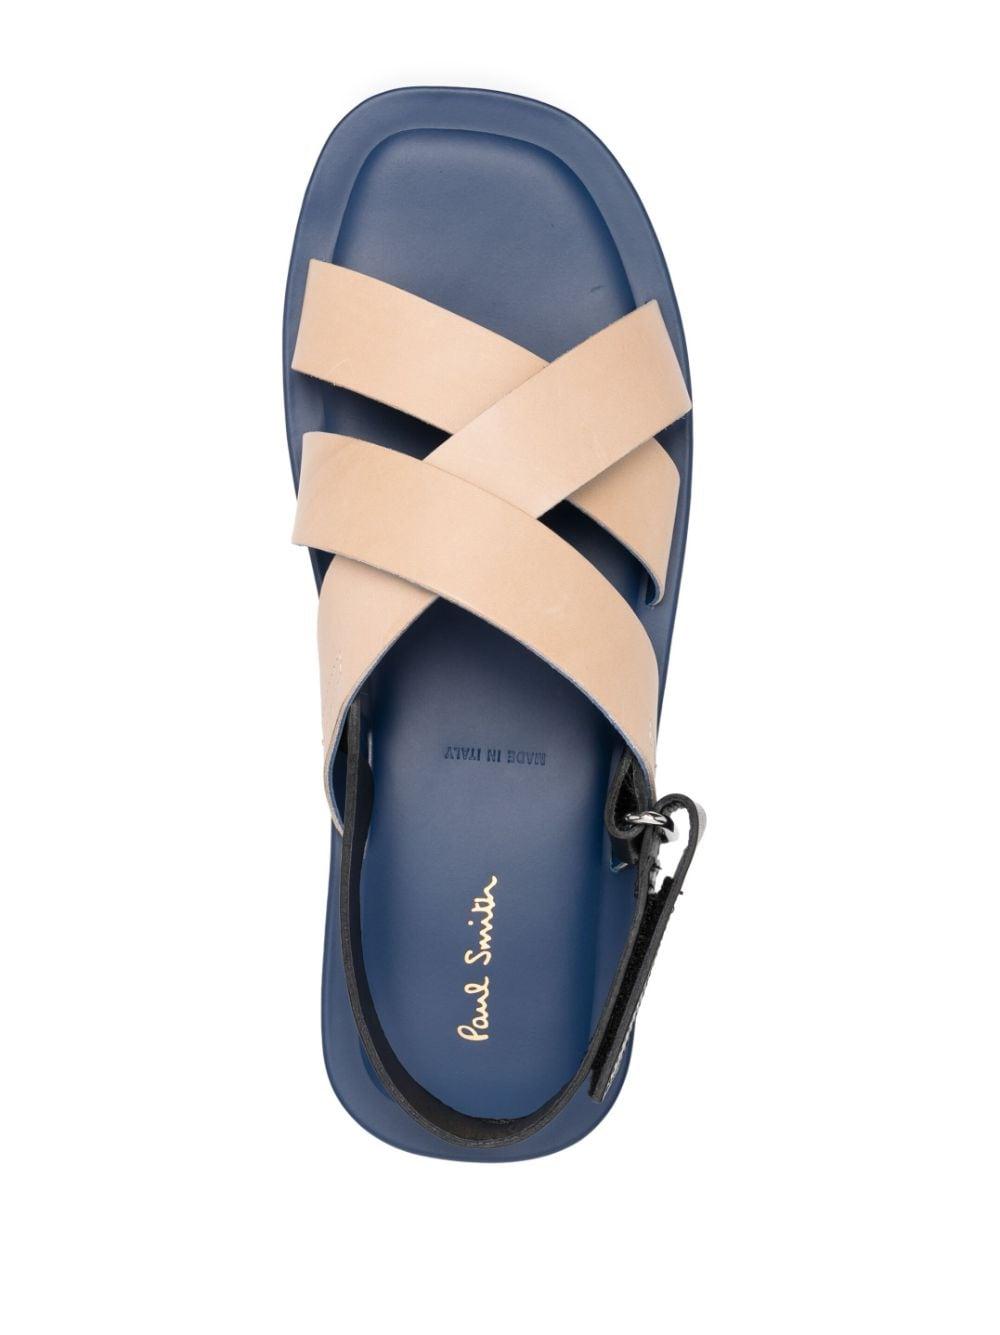 Paul Smith 'batiste' Leather Sandals in Natural for Men | Lyst